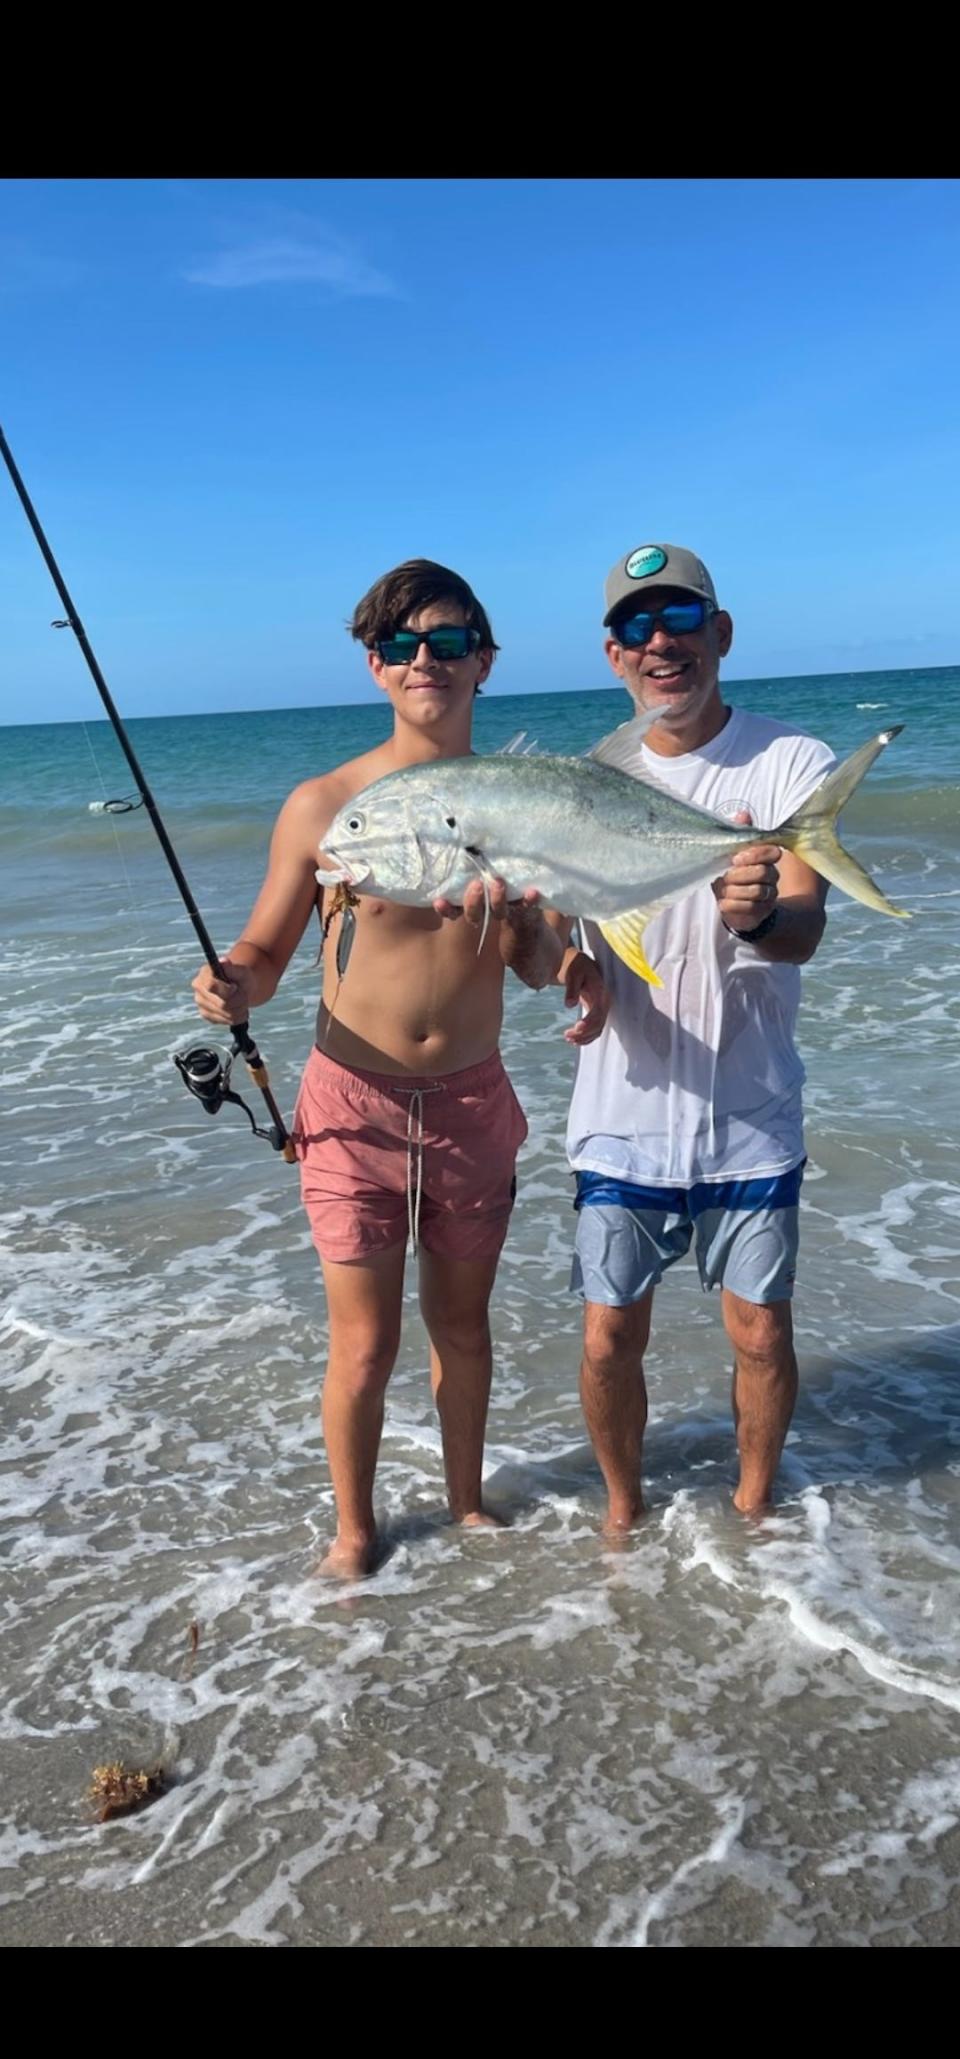 Fishing at Juno Beach, Lucas (left) and his dad Arnoldo Puig used a spoon to catch and release this impressive jack crevalle.